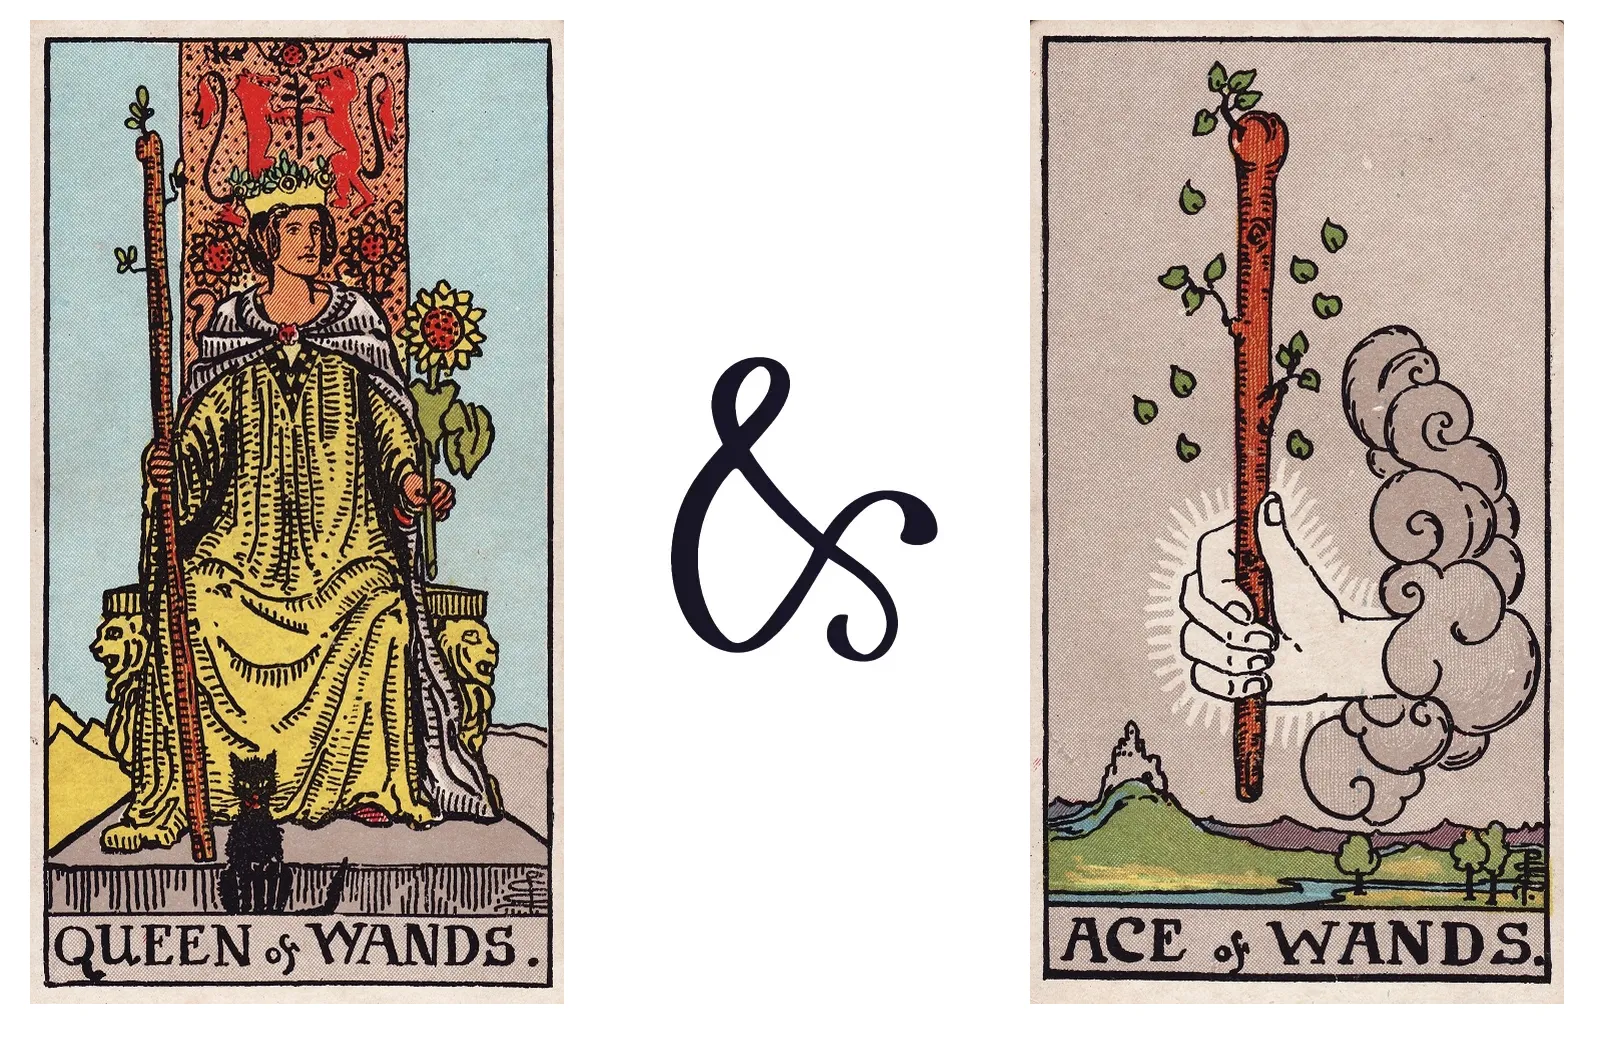 Queen of Wands and Ace of Wands